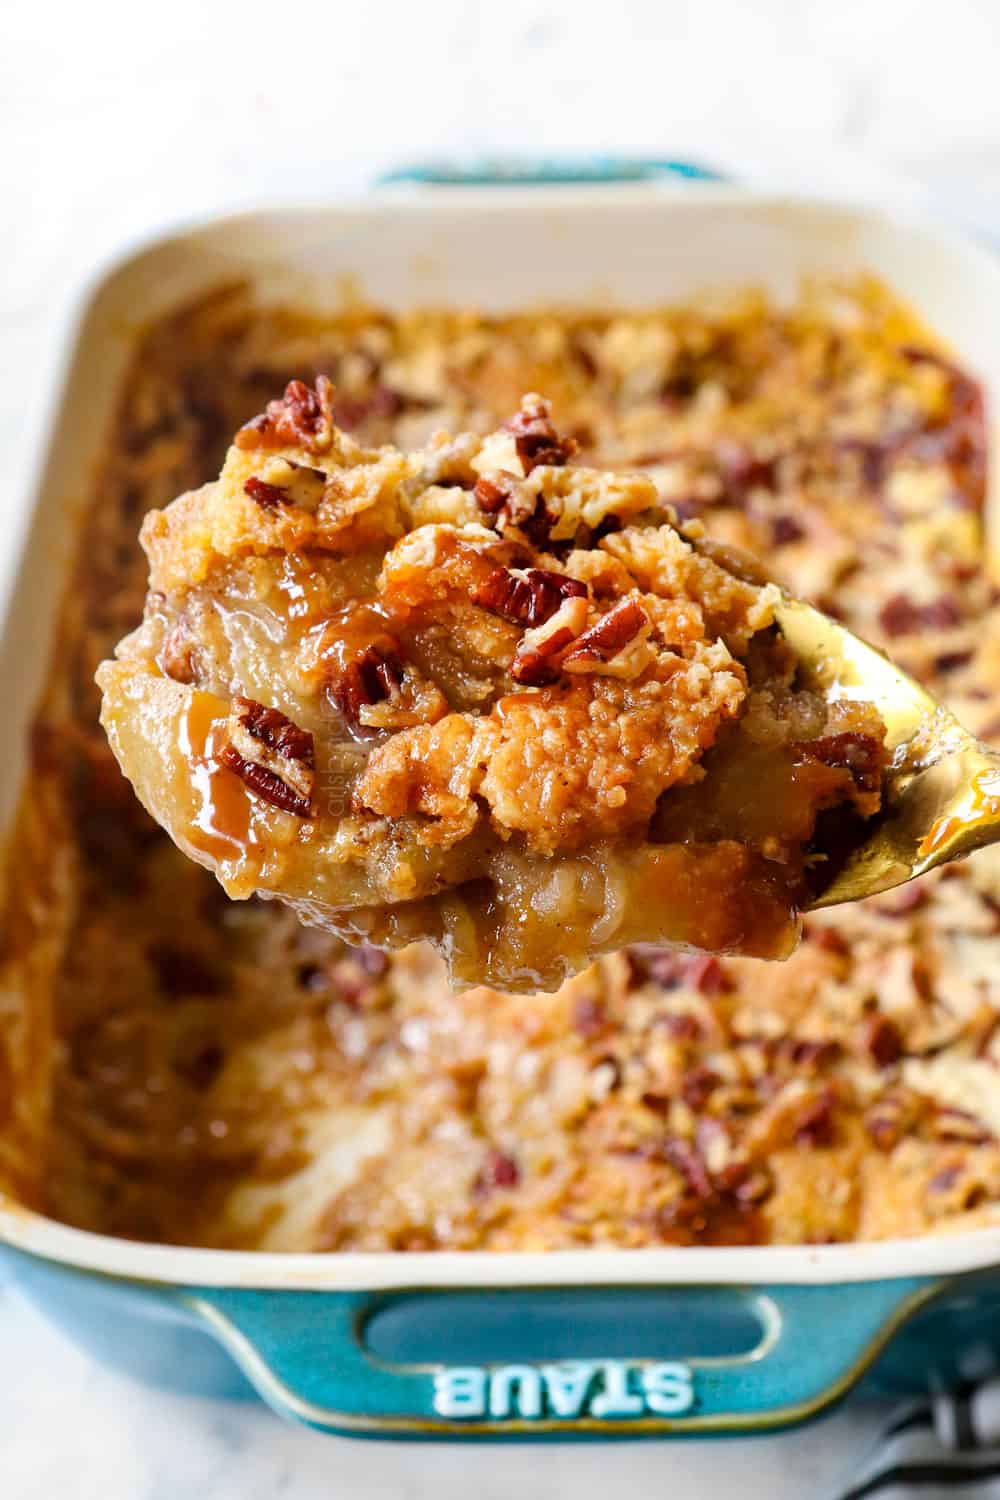 up close of a scoop of apple dump cake recipe with apples, cake mix, butter and pecans